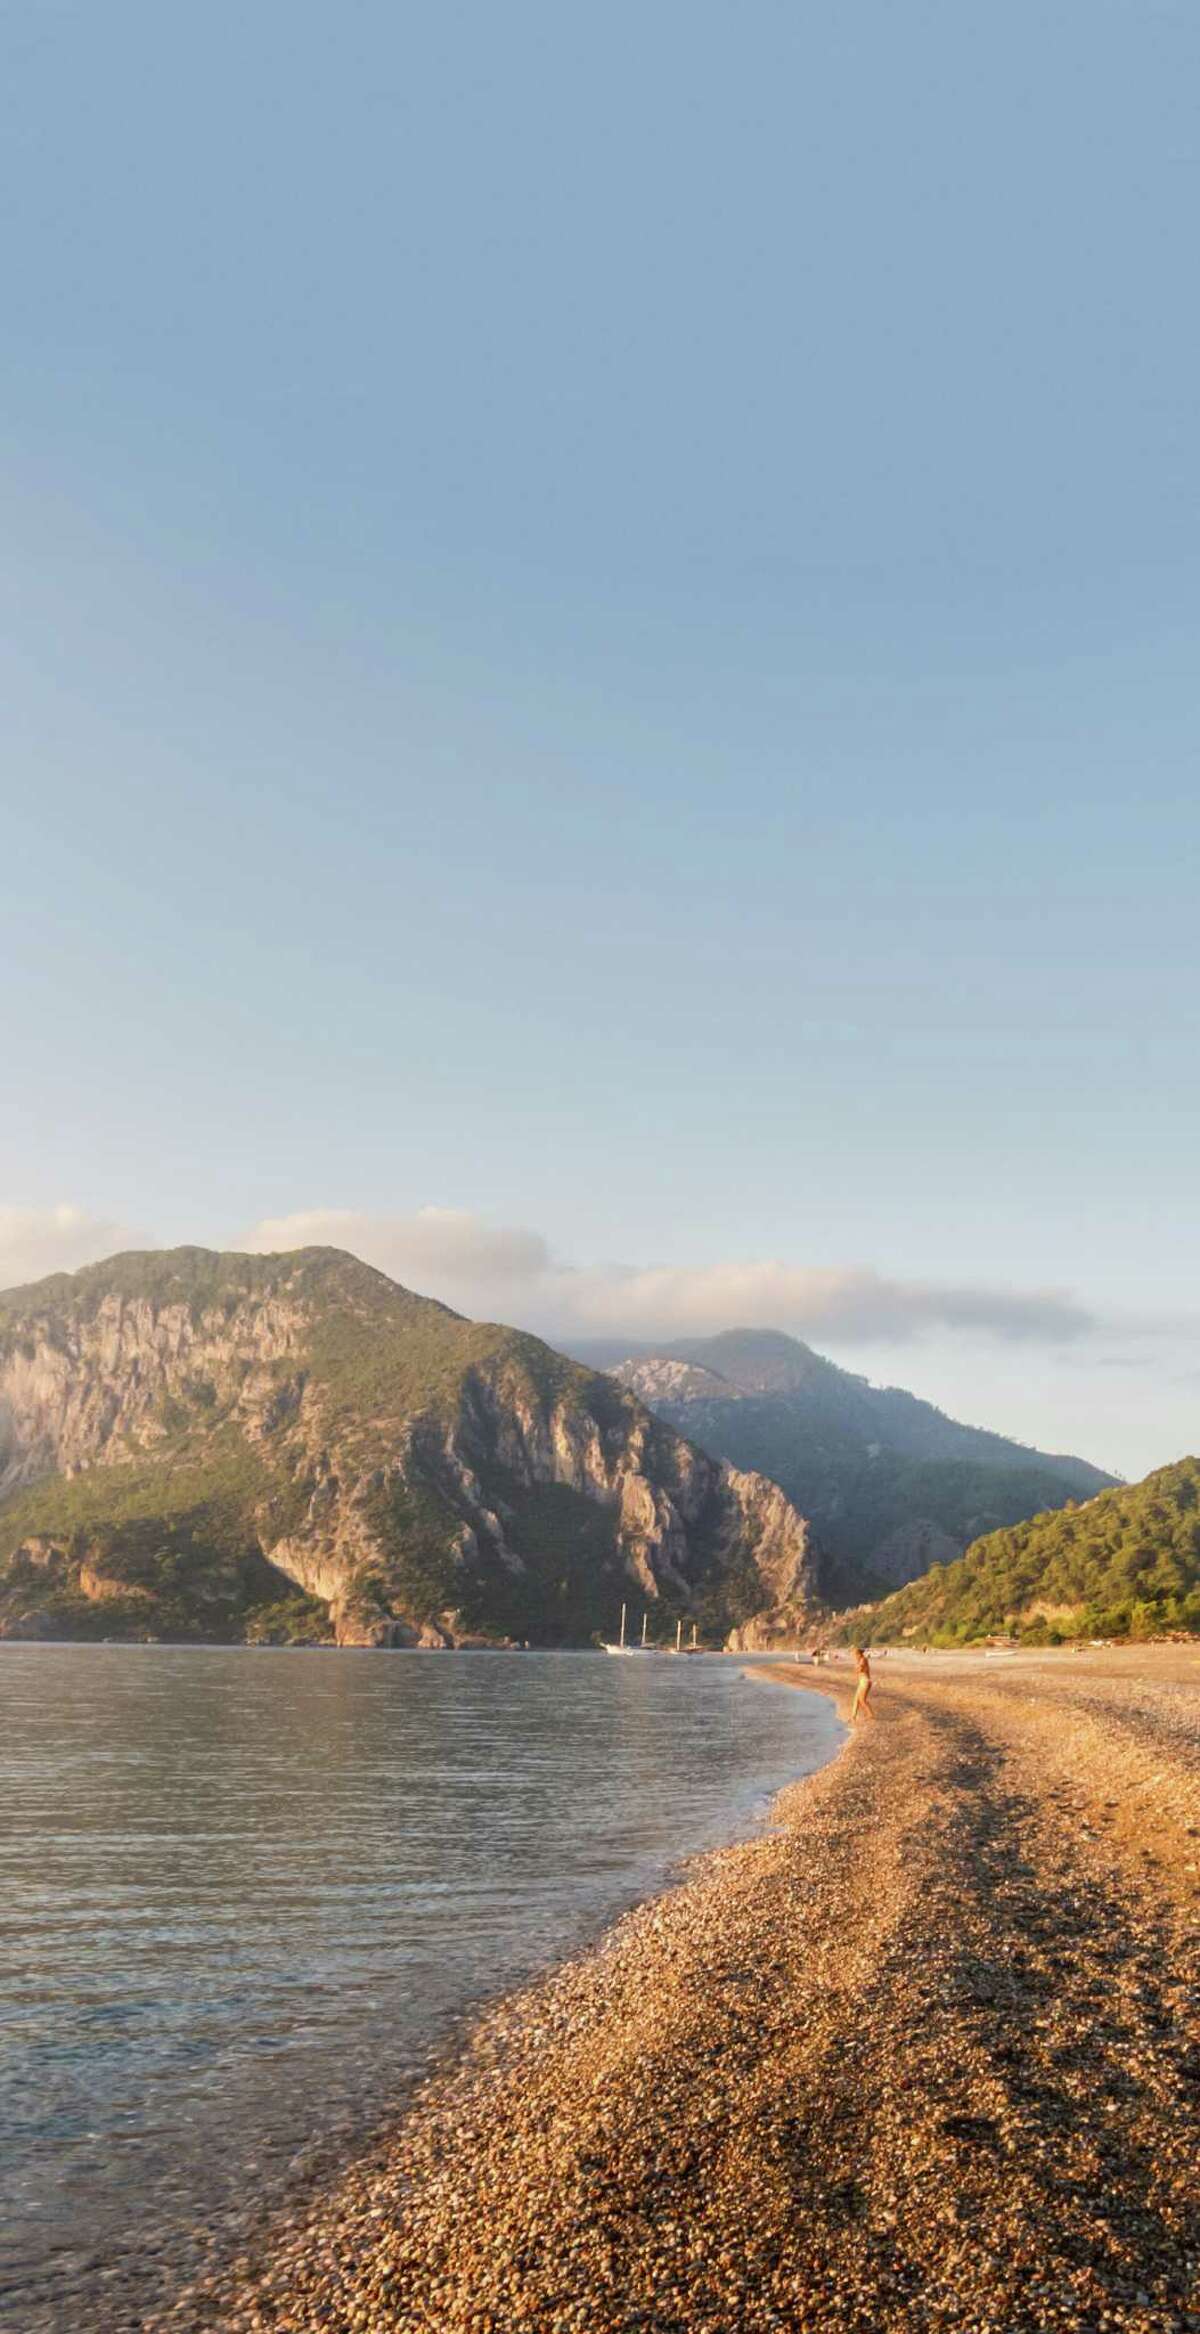 With a mountainous backdrop, the rocky beach in Cirali has crystal-clear water that's warm enough for swimming through late fall.